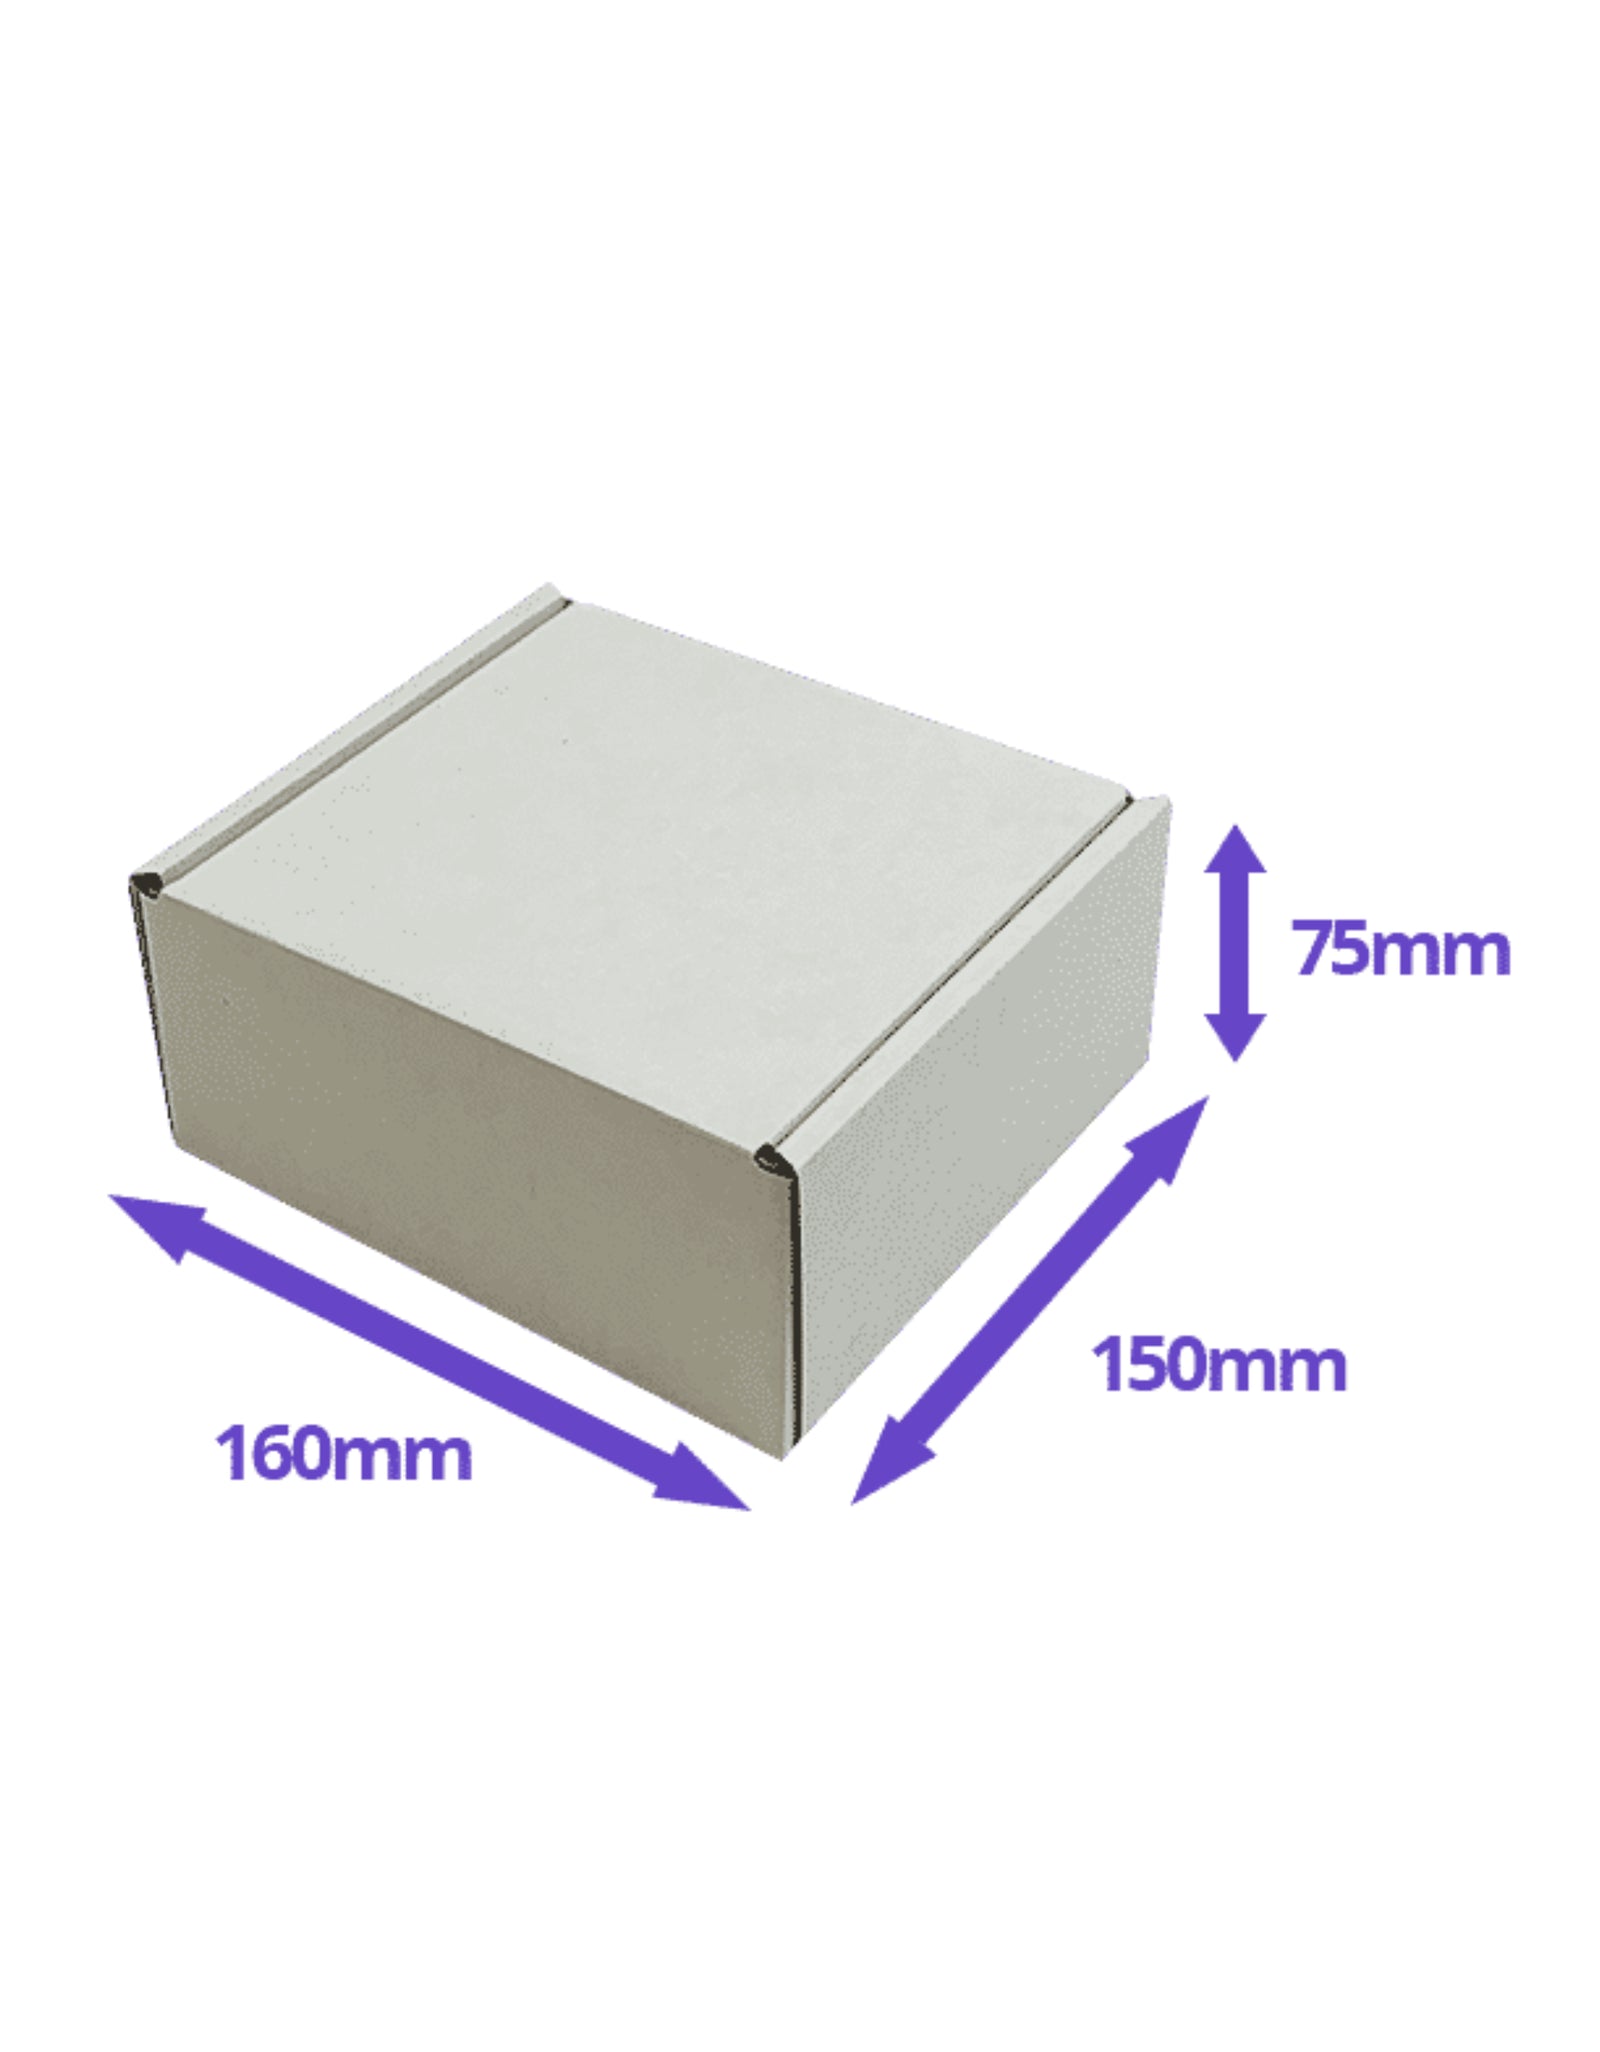 white cardboard boxes, turk-in cardboard boxes, flap single wall cardboard boxes, cardboard boxes, parcel box, parcel box for home, royal mail parcel box, post office parcel box sizes, large parcel box